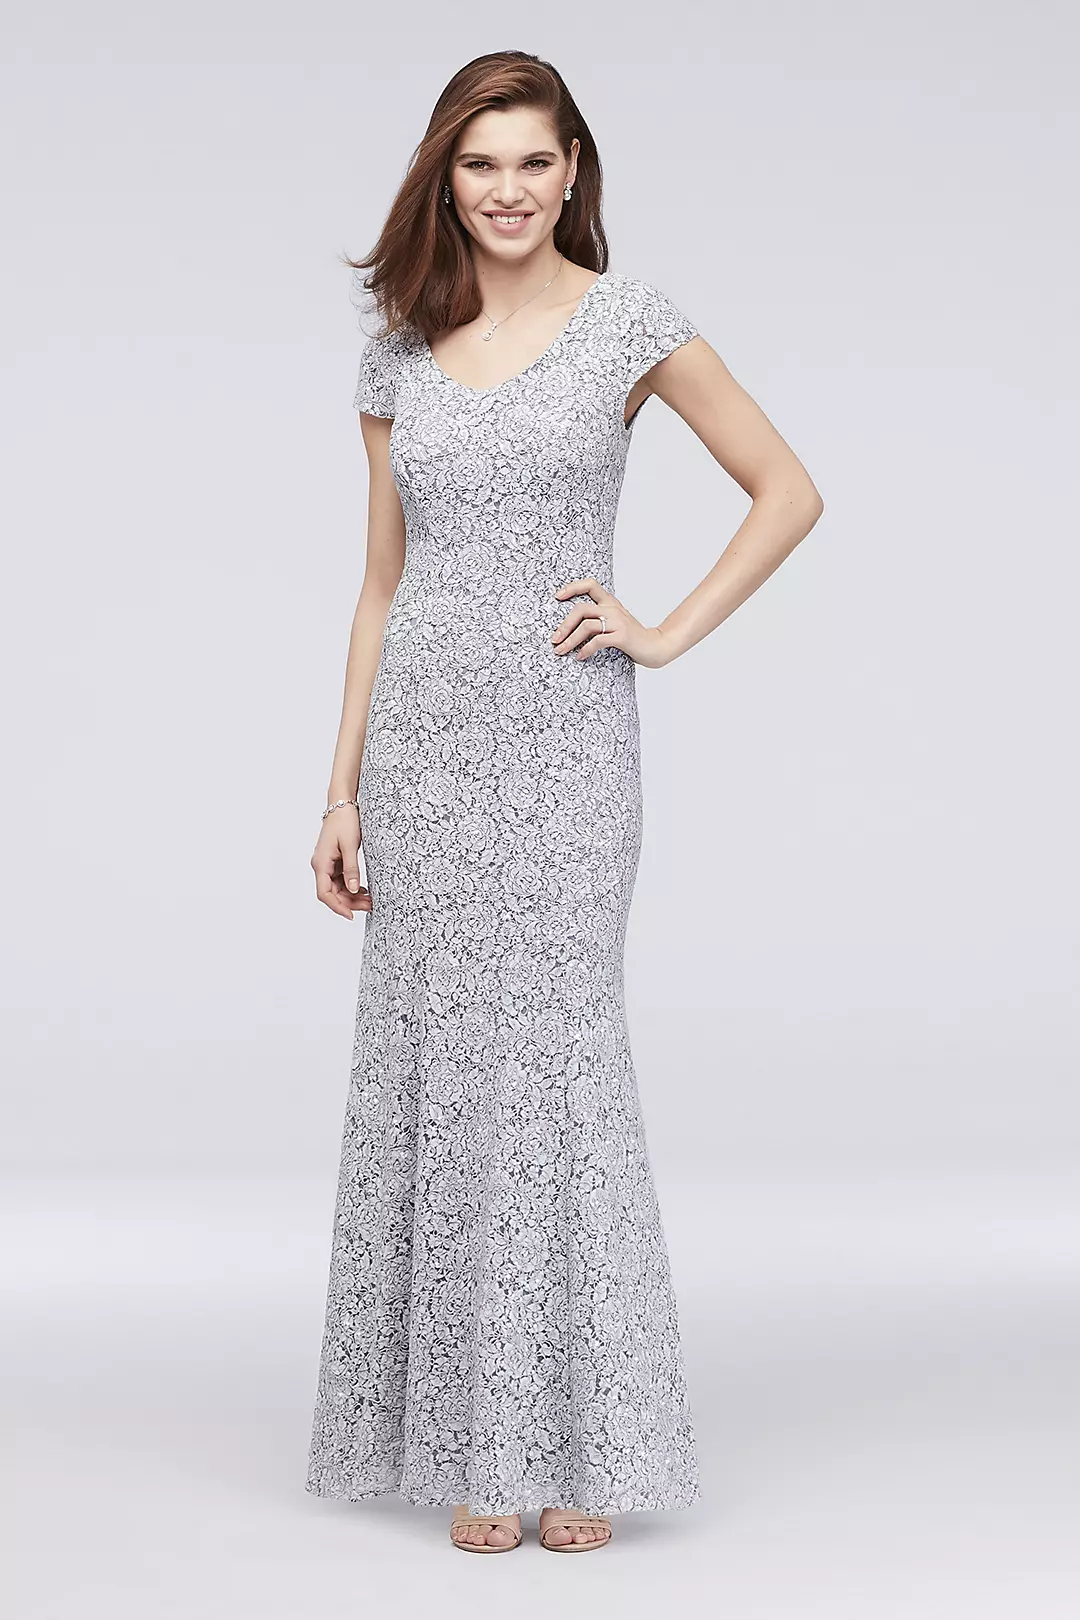 Lace Mermaid Petite Dress with Floral Piping  Image